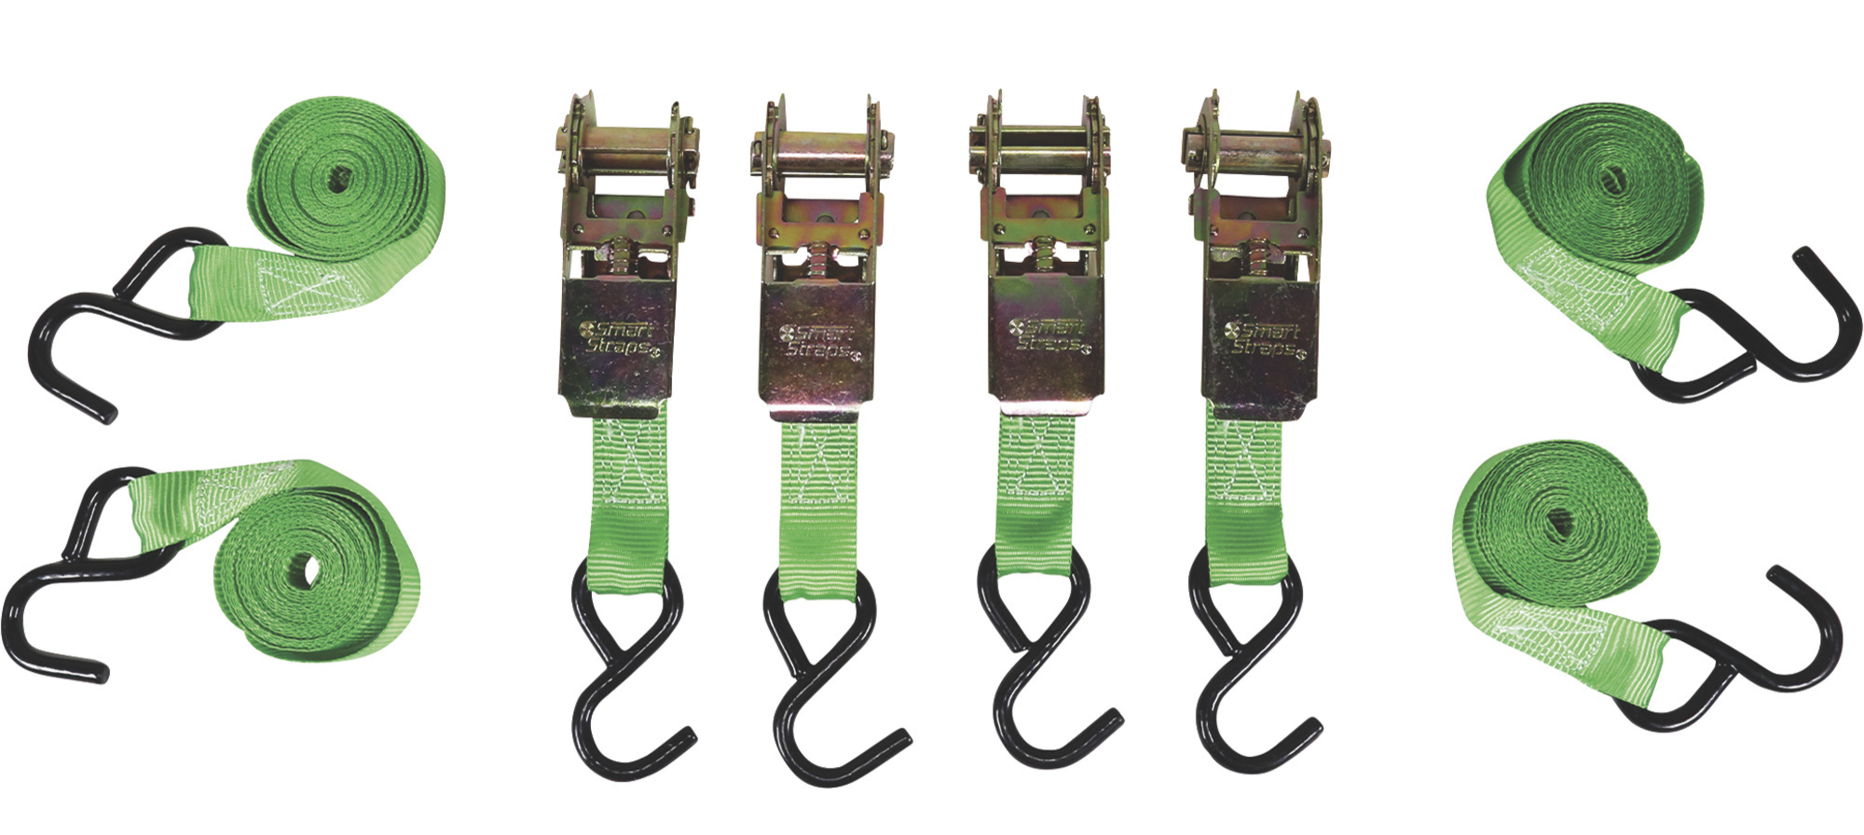 FREE: Northern Tool Coupon 4-pack of SmartStraps ratchet straps No purchase Necessary. In Store 5/27-5/29